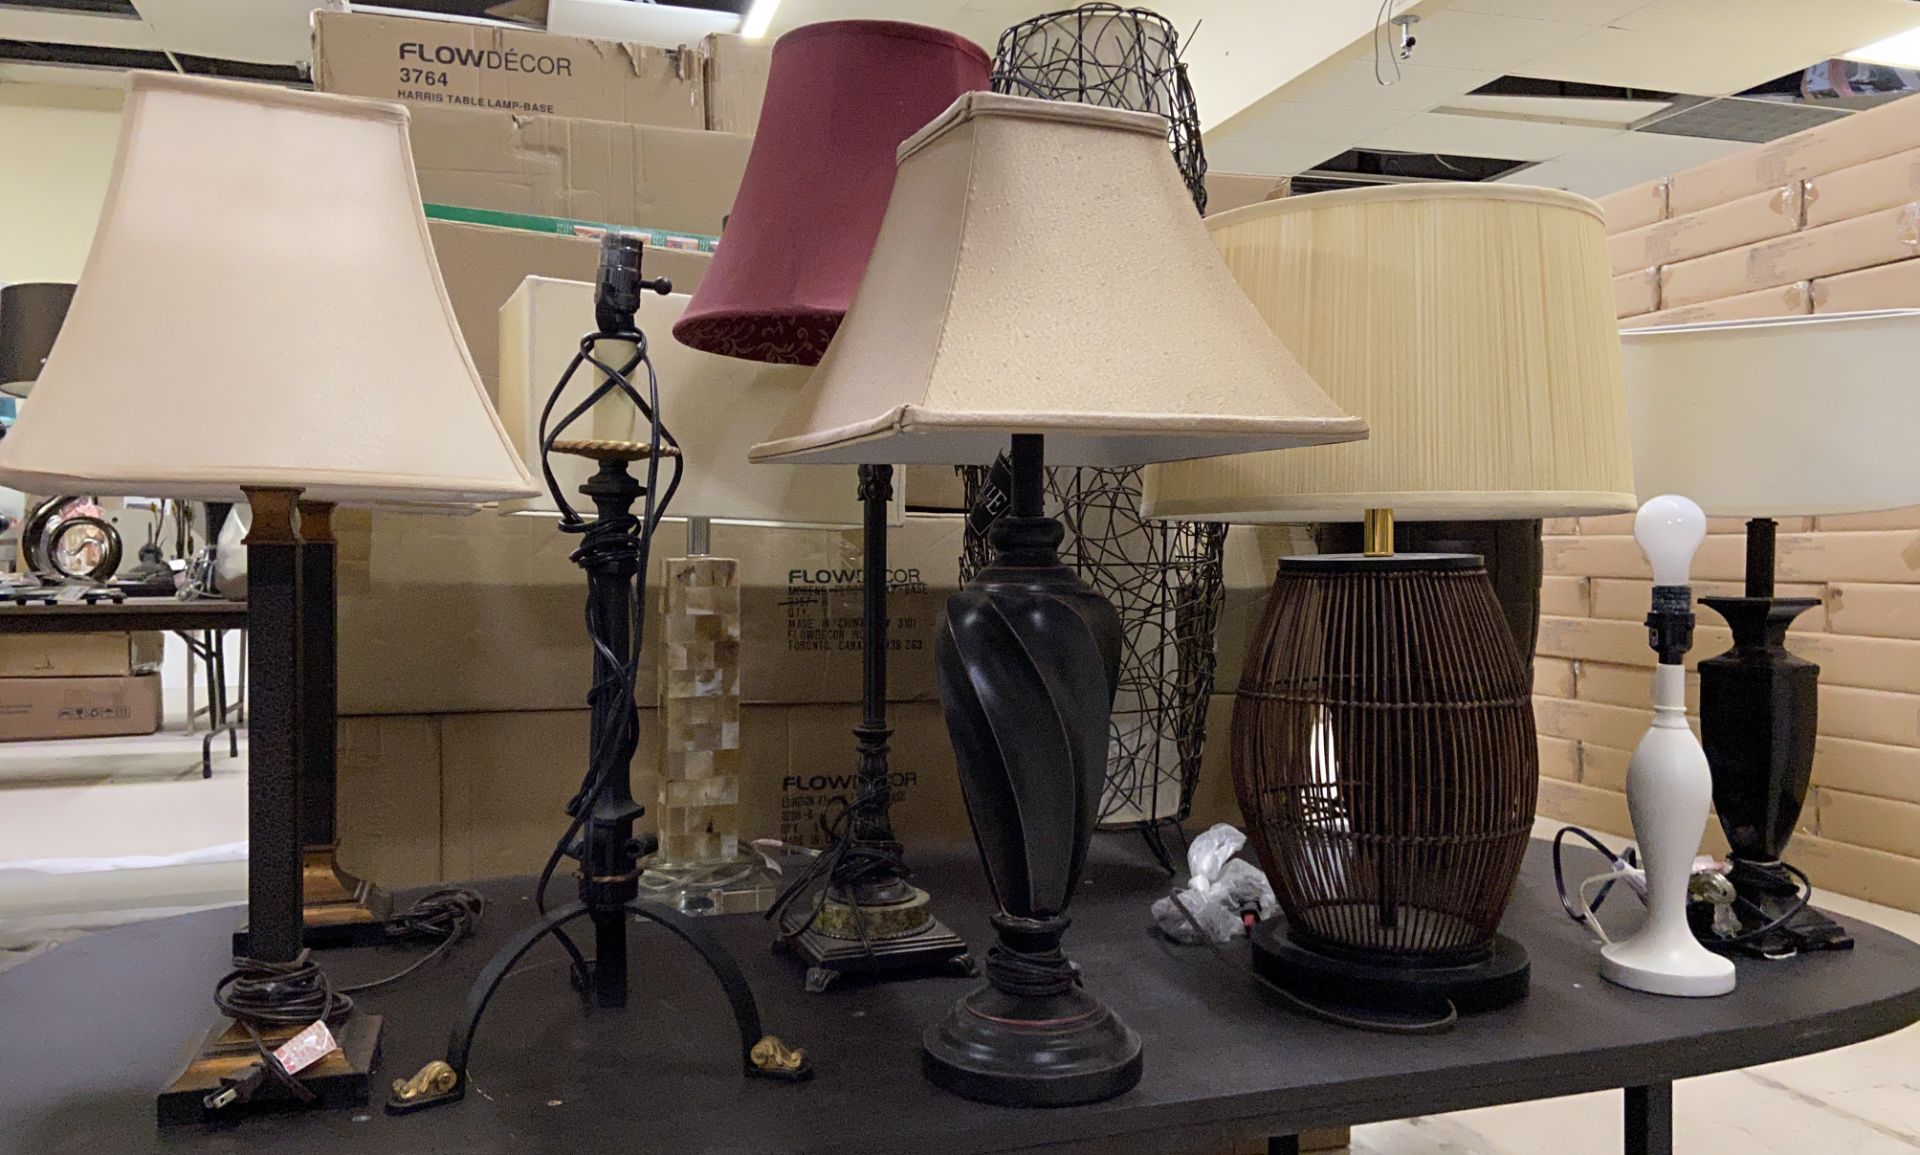 11 New Decorative Luxury Lamps with Shades - Image 3 of 6